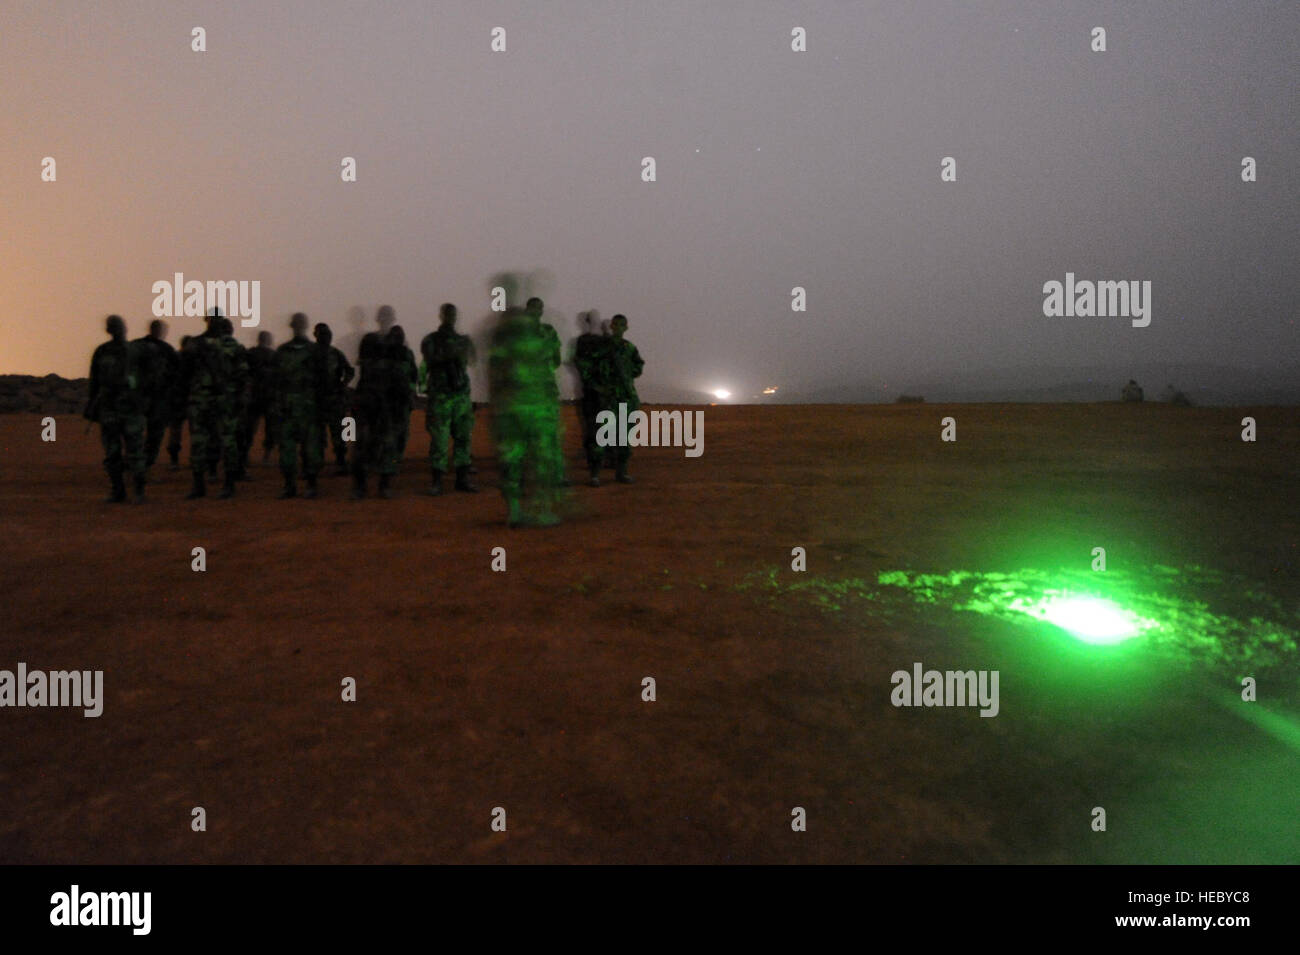 Djiboutian army soldiers wait at a start point during a night vision goggle class in Arta, Djibouti, on March 25, 2012. The U.S. Army's 3rd Squadron, 124th Cavalry Regiment, deployed in support of Combined Joint Task Force - Horn of Africa (CJTF-HOA), is helping train Djiboutian army soldiers for an upcoming deployment to Somalia. Stock Photo